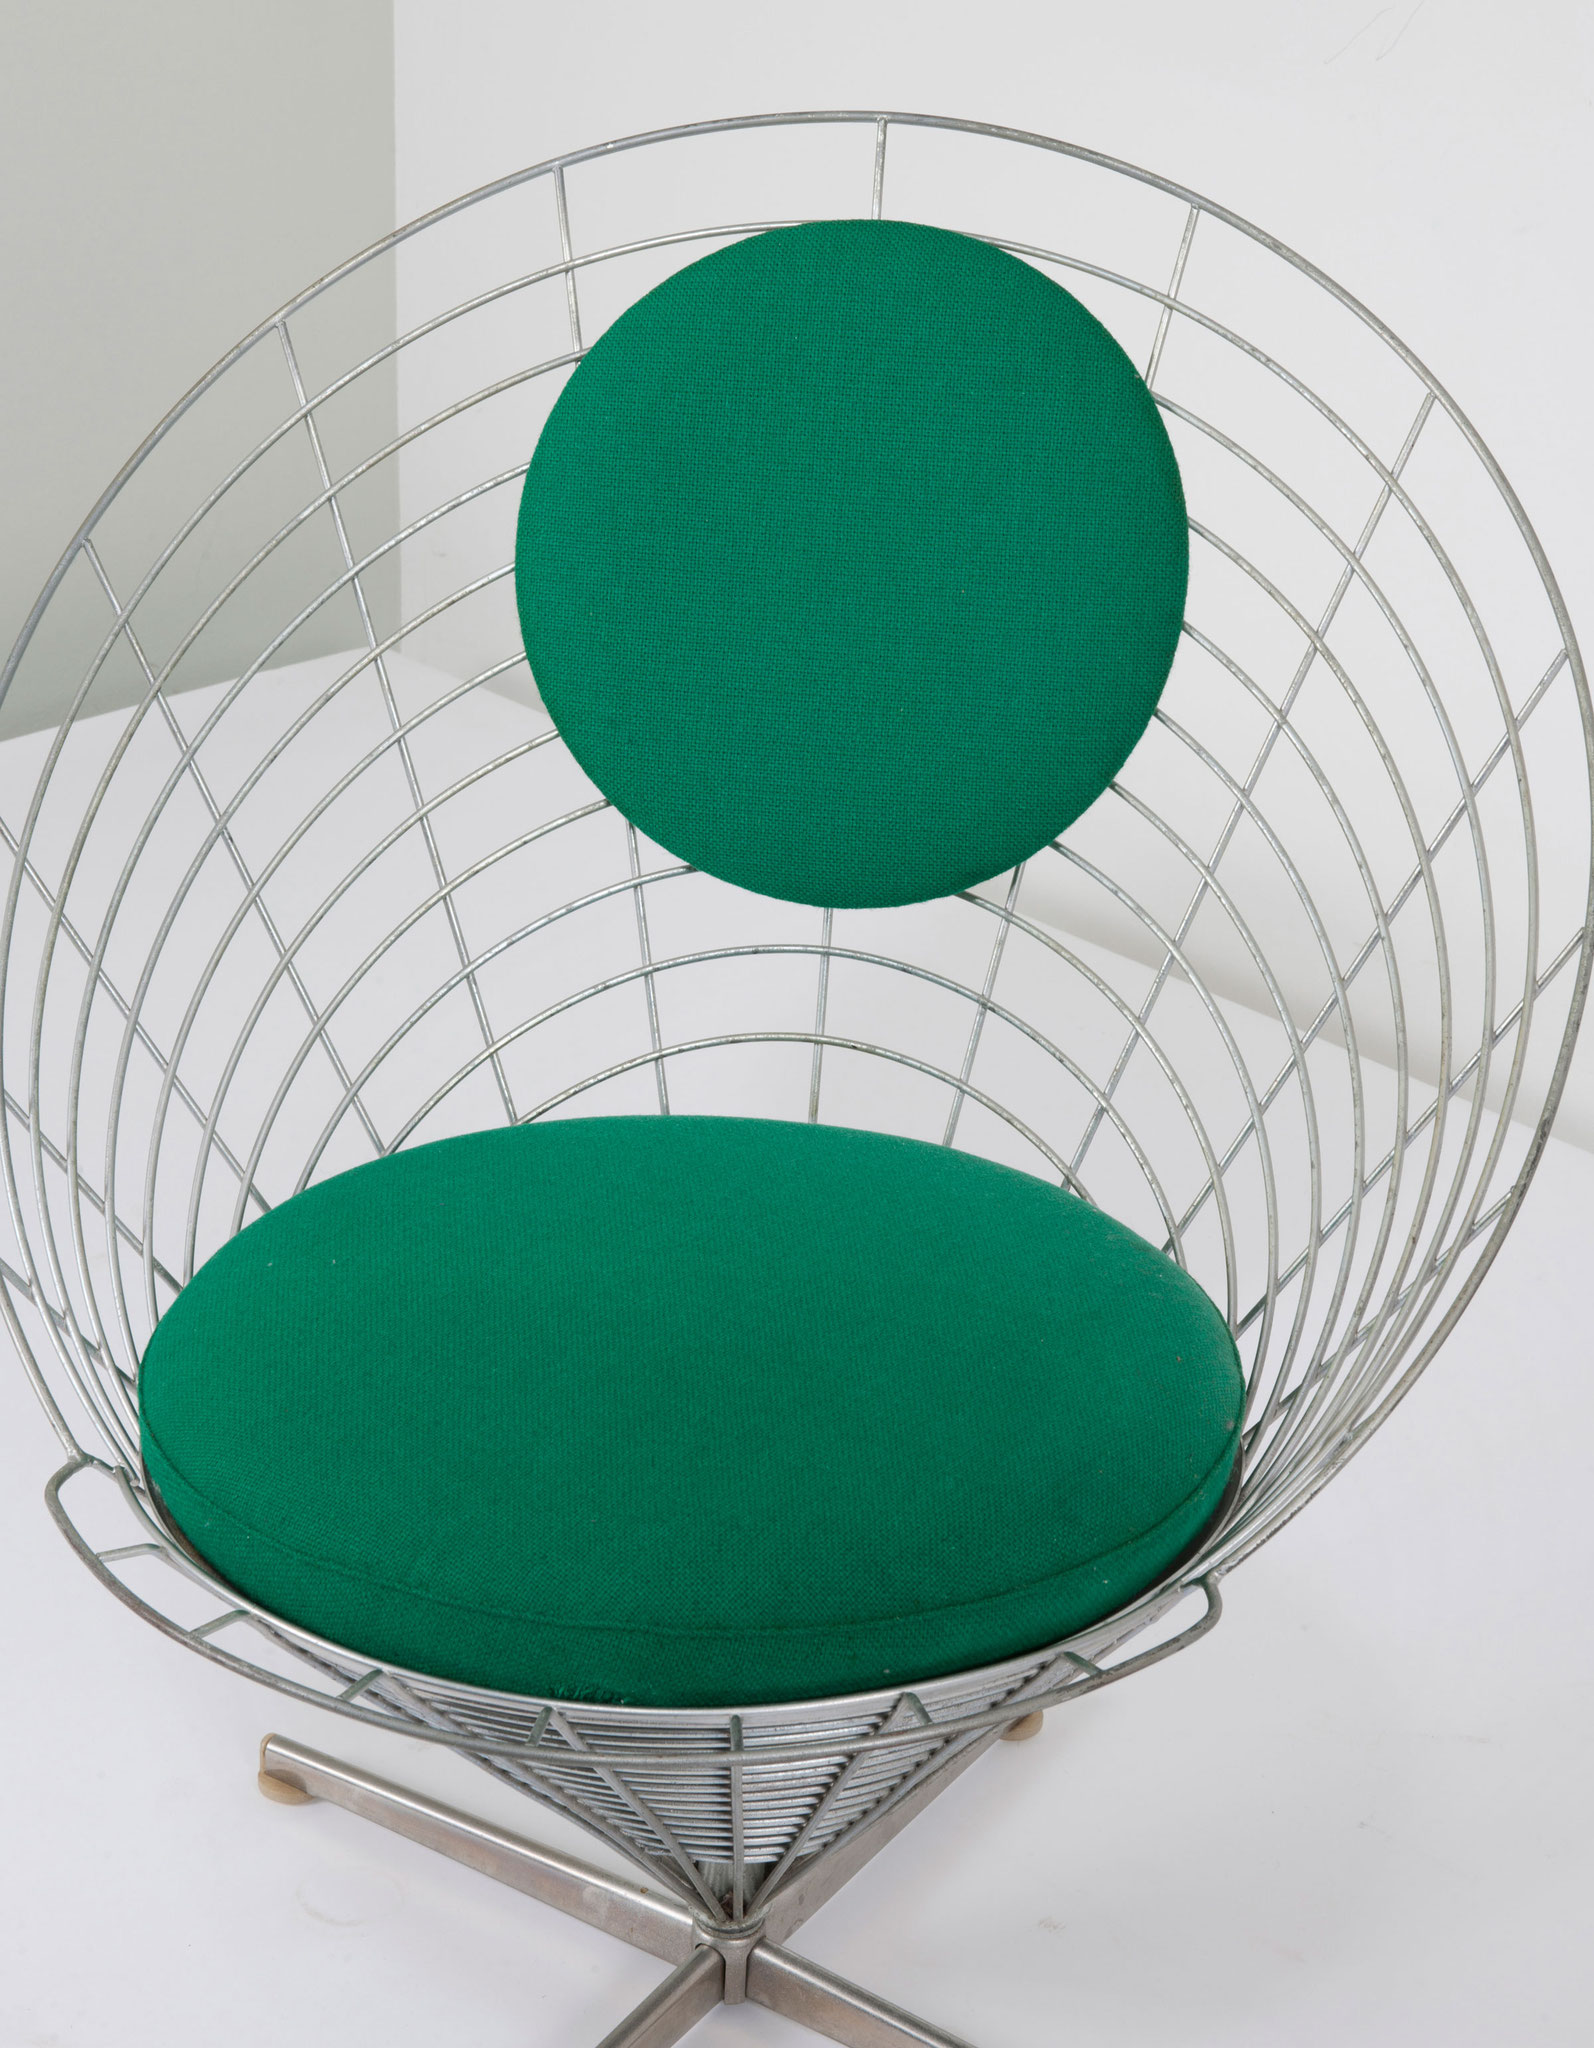 K2 Cone Wire Chair (1959)